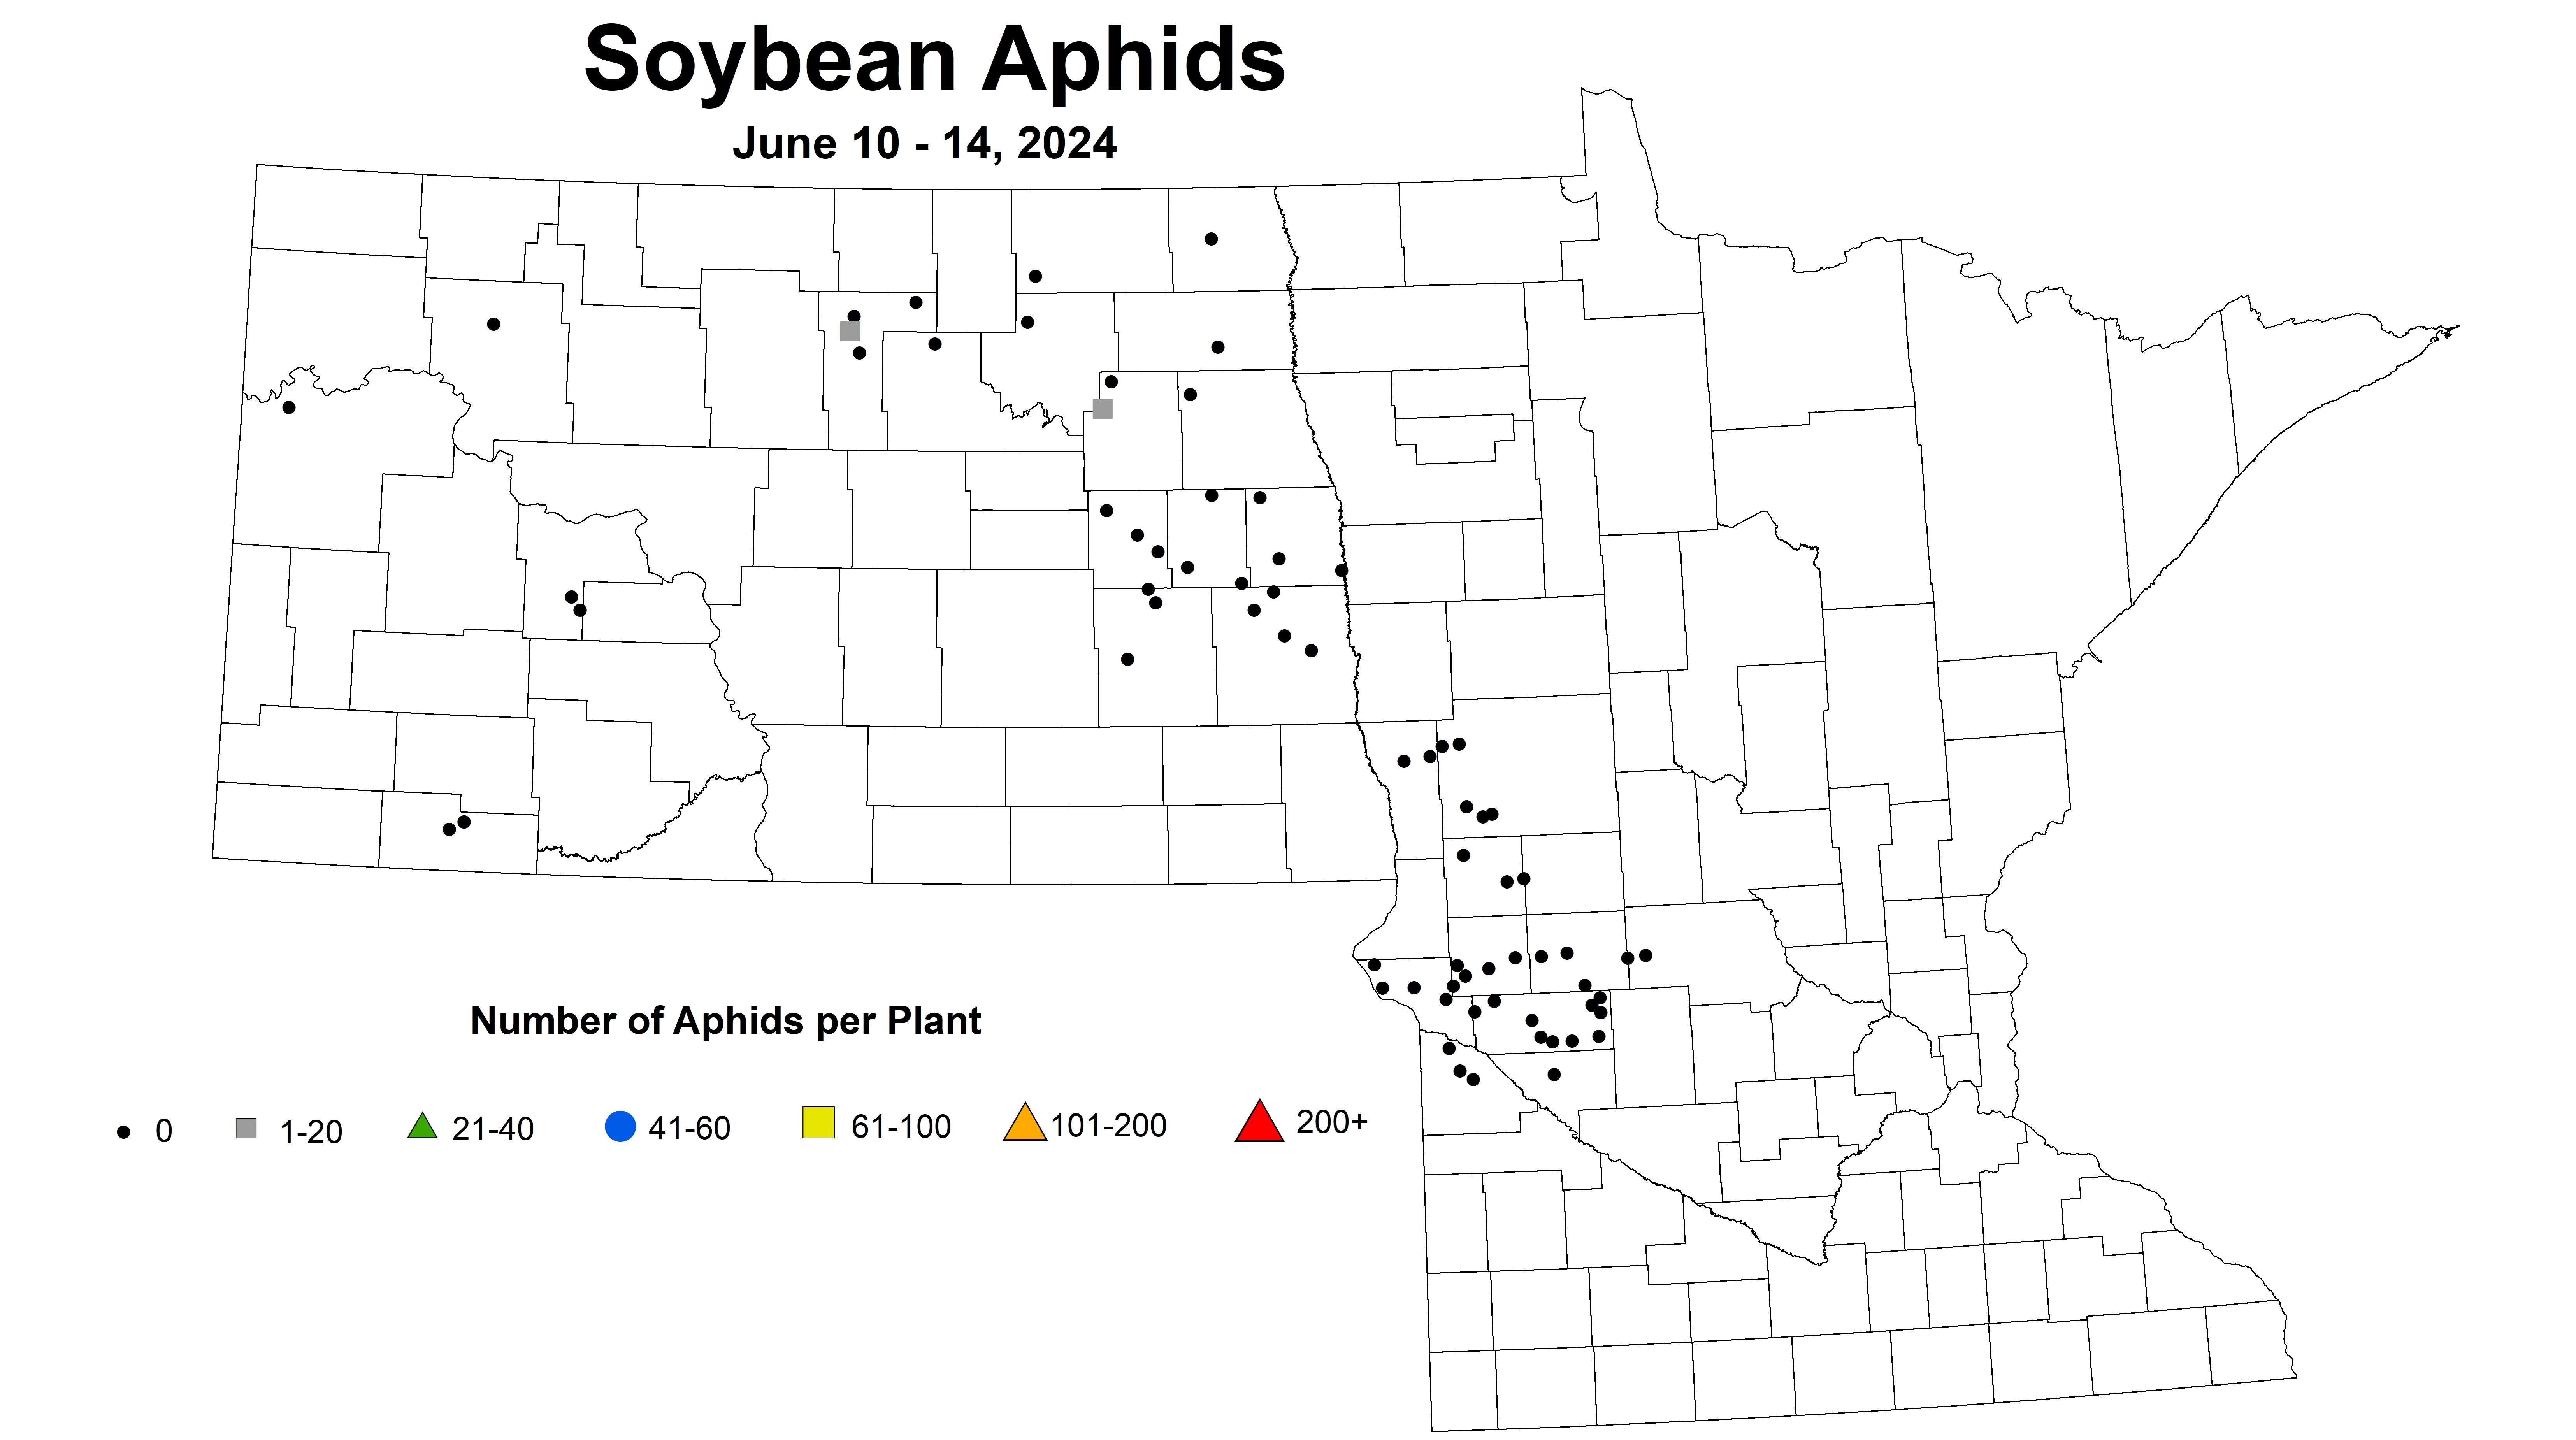 soybean average number of aphids per plant June 10-14 2024